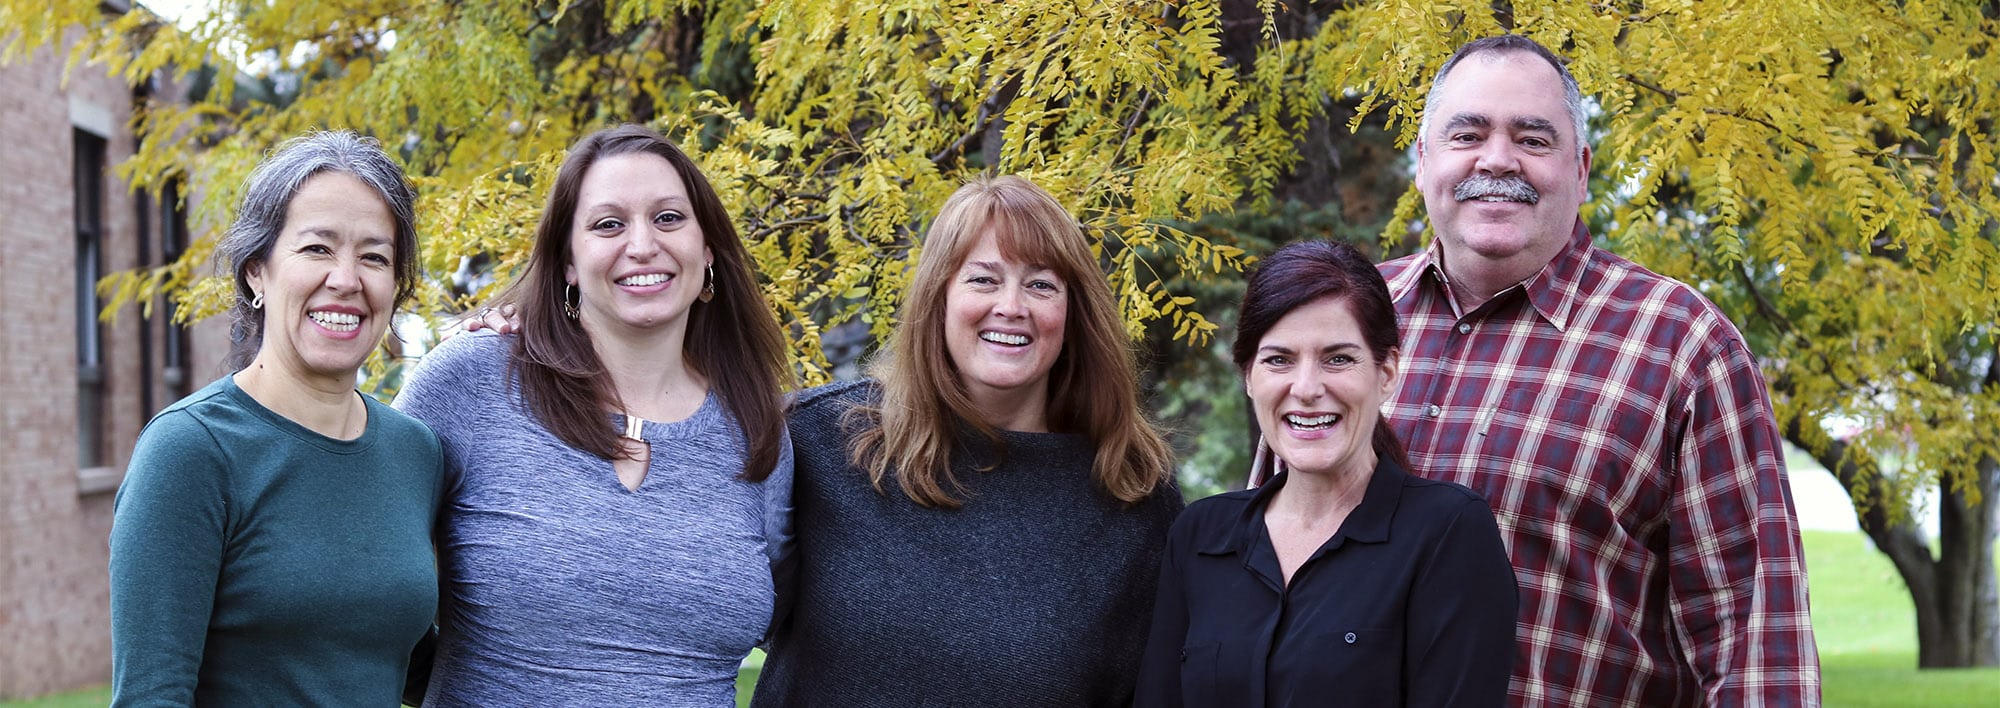 Ana, Melissa, Allison, Juliana and Jim of the client services team at Leader Dog stand with their arms around each other smiling at the camera in front of a tree